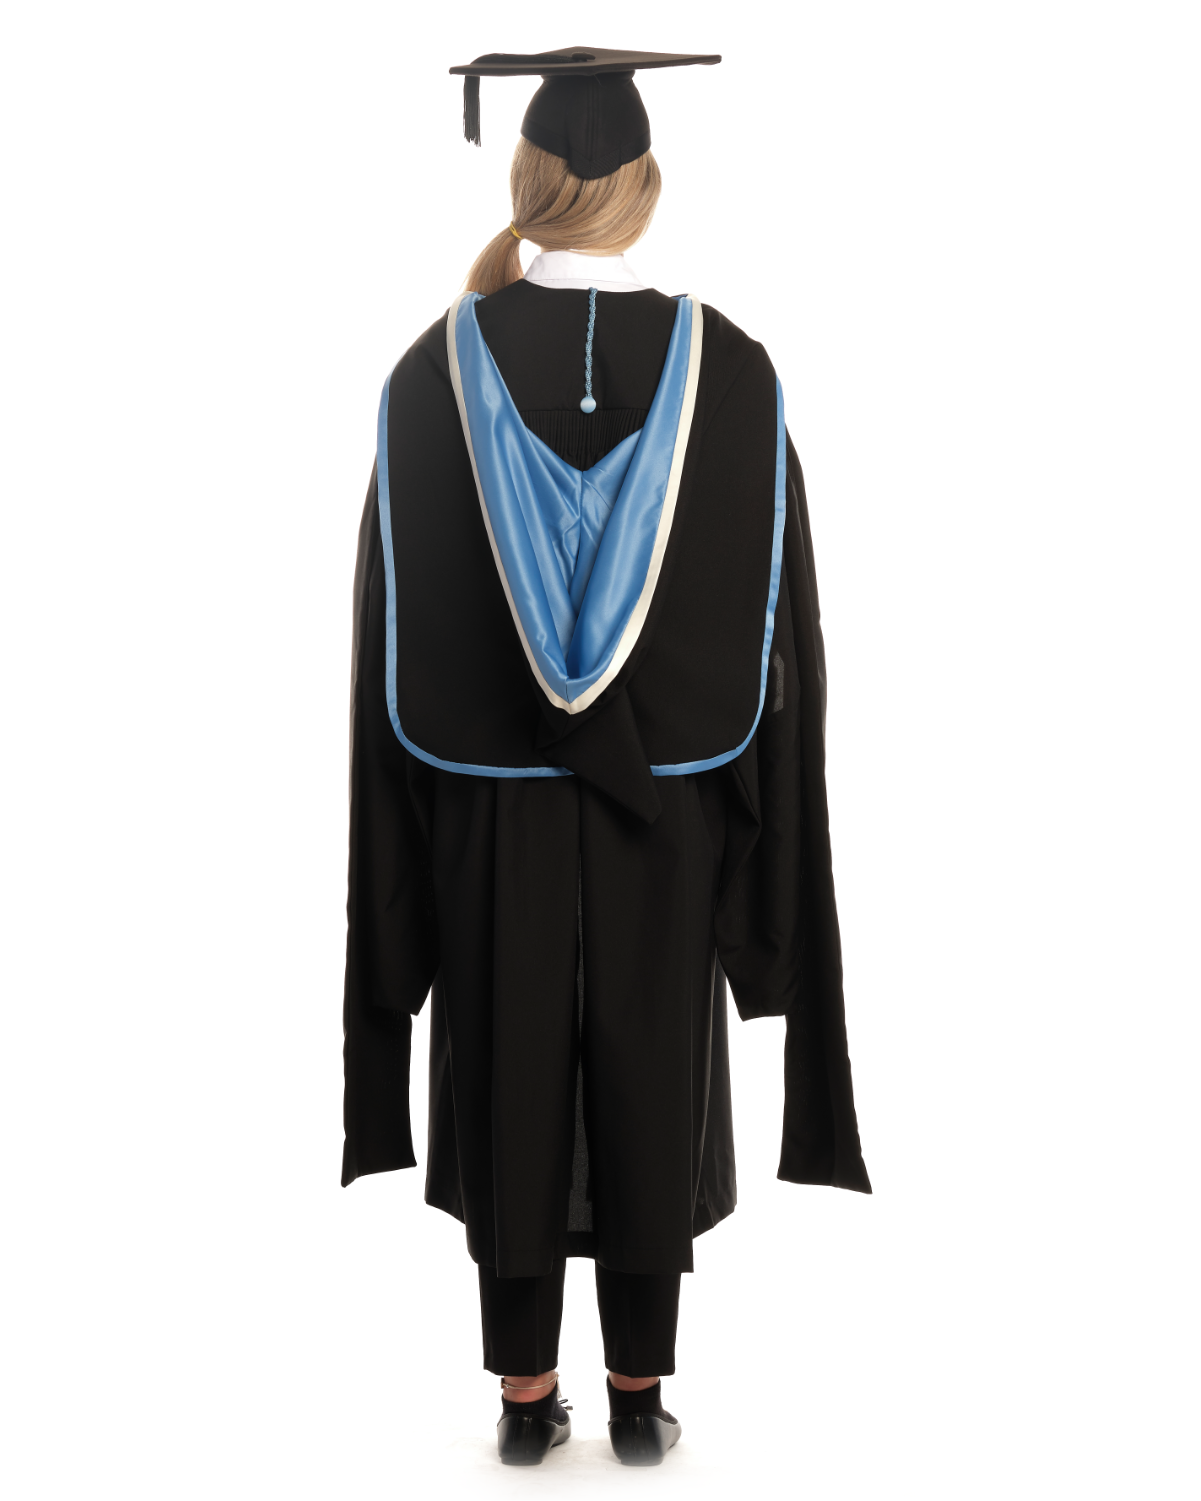 University of Southampton | MMus | Master of Music Gown, Cap and Hood Set